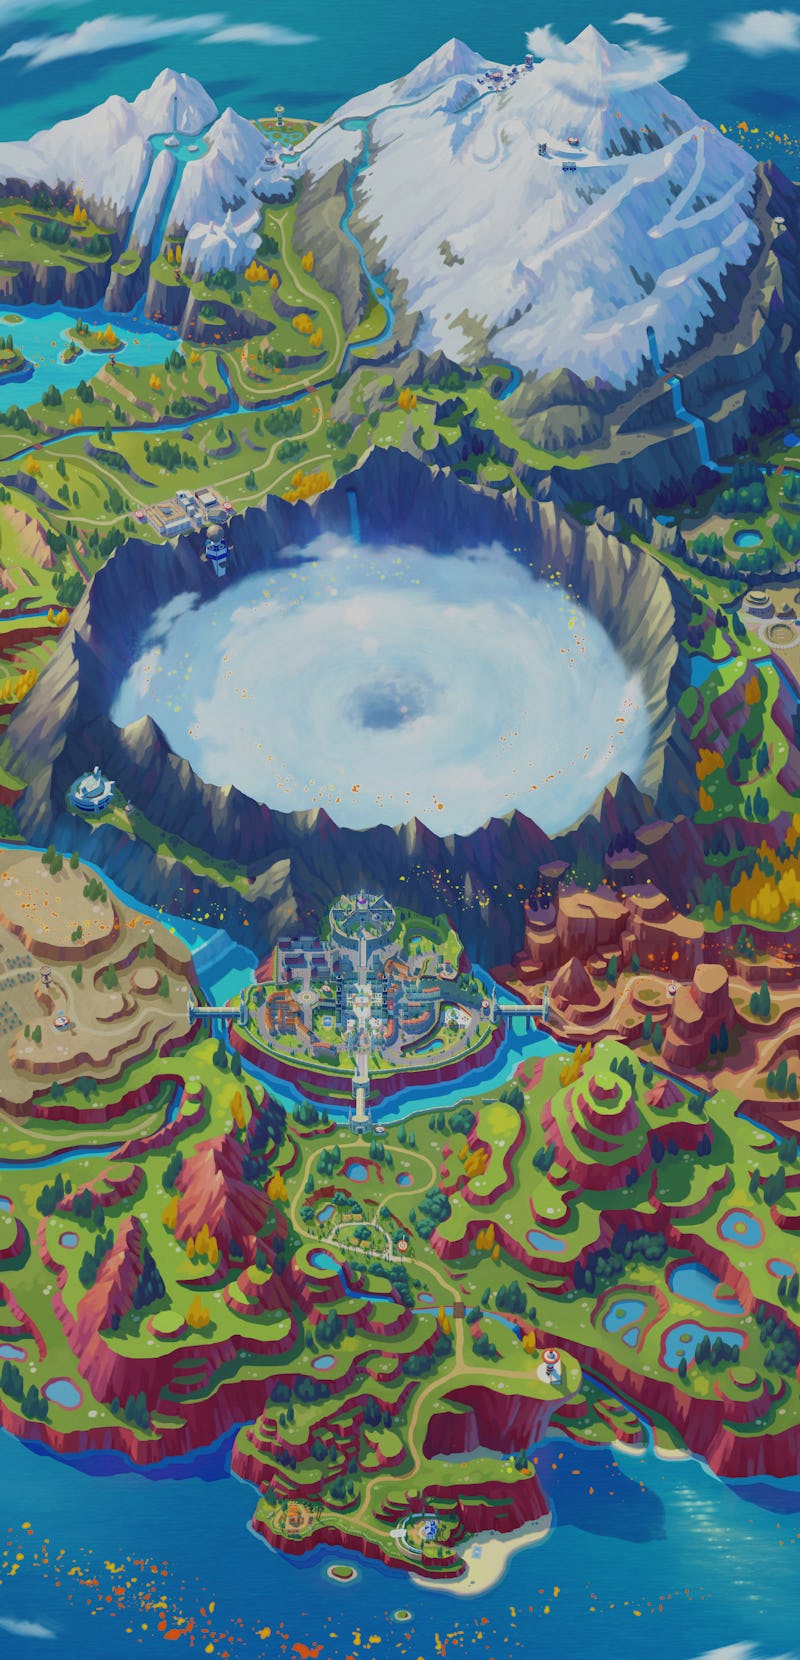 A map of the Paldea region in Pokémon Scarlet and Violet.